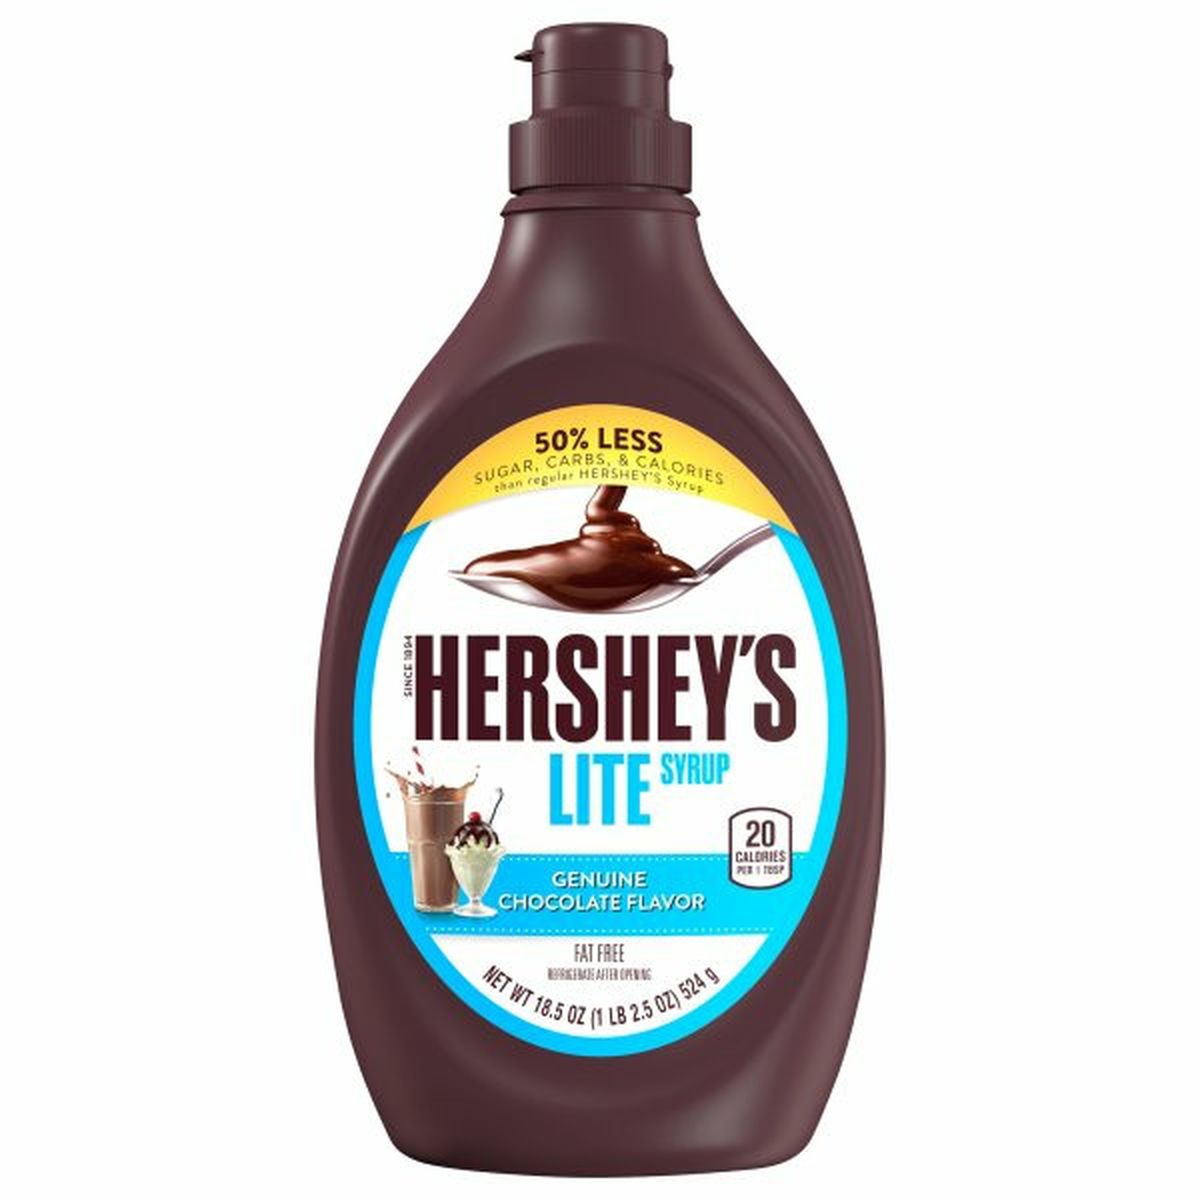 Calories in Hershey's Syrup, Lite, Genuine Chocolate Flavor